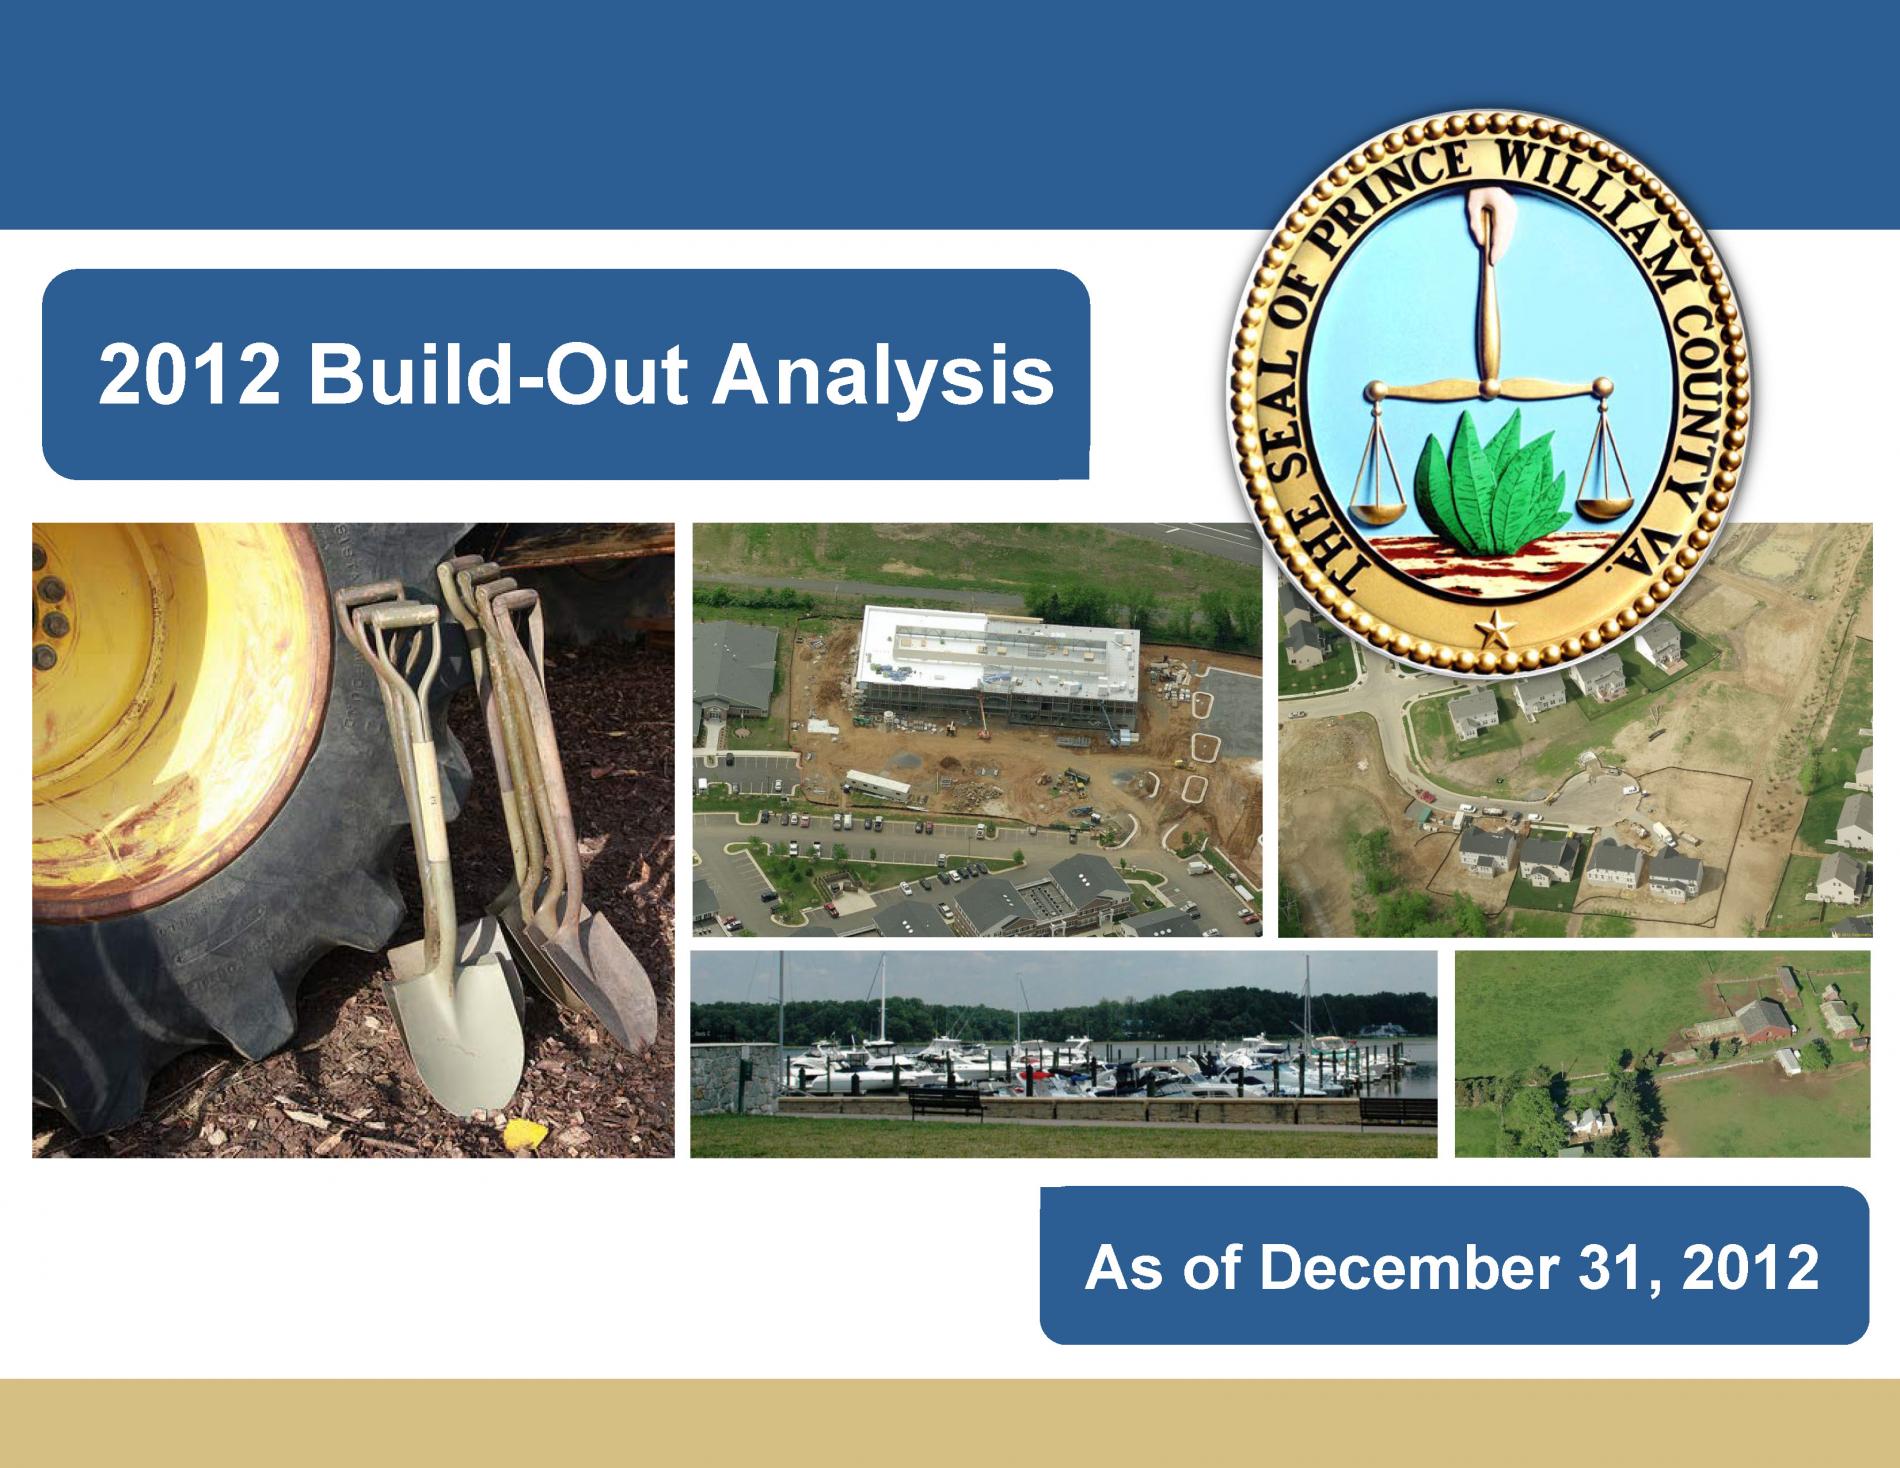 2012 Build-Out Analysis cover page